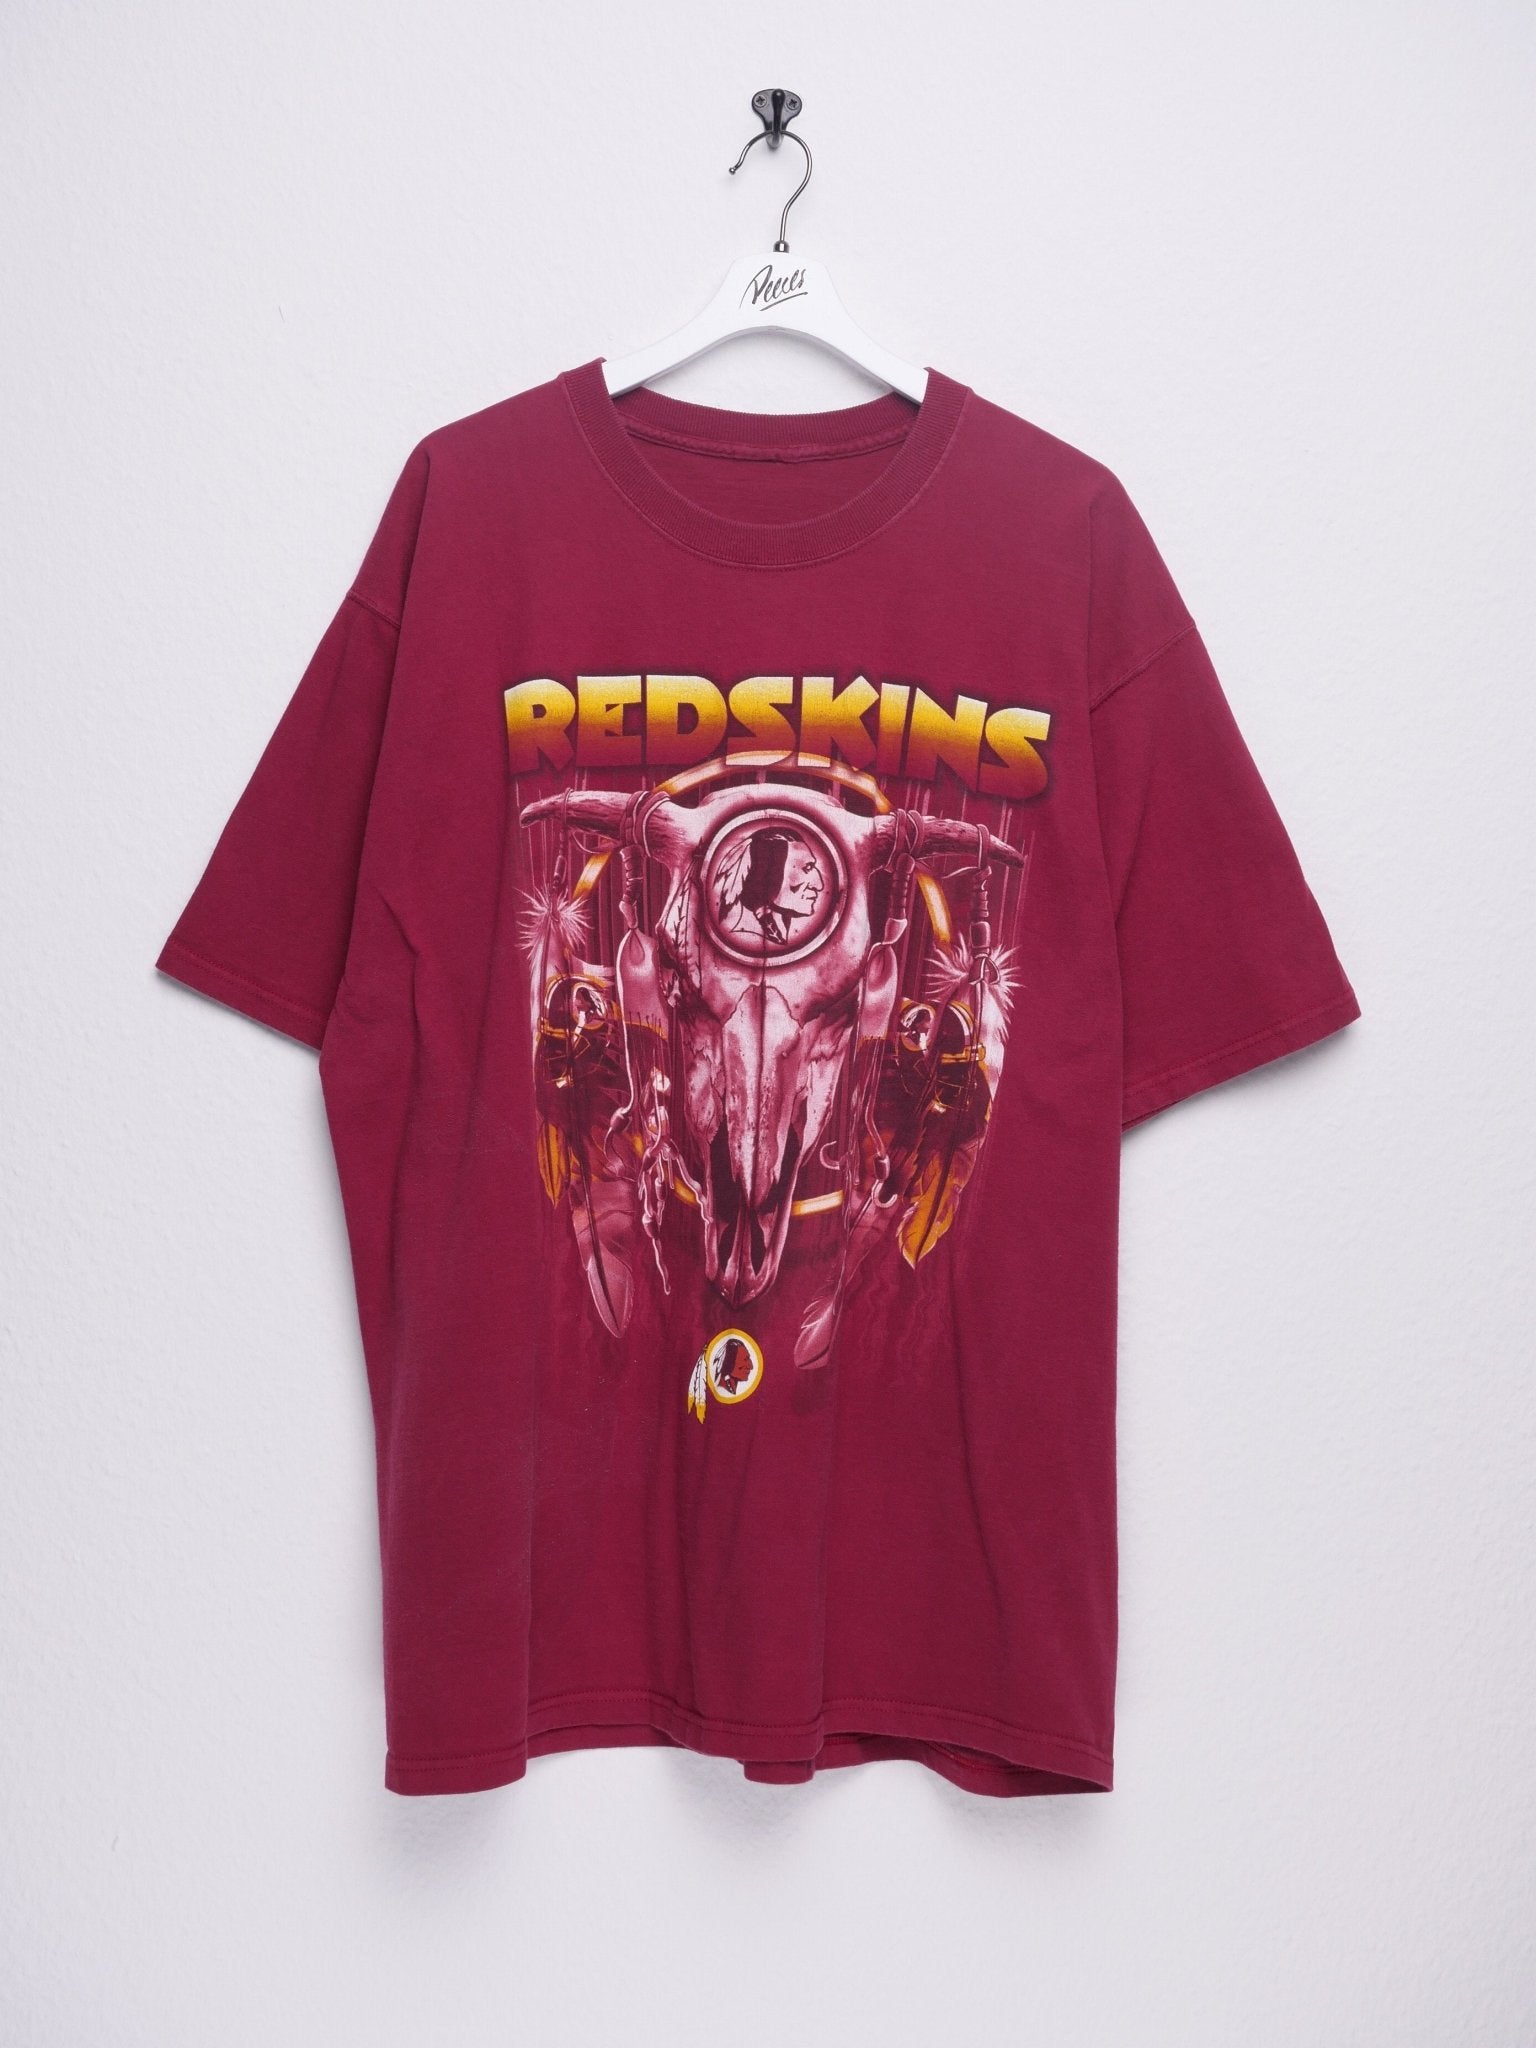 Redskins printed Graphic red Shirt - Peeces